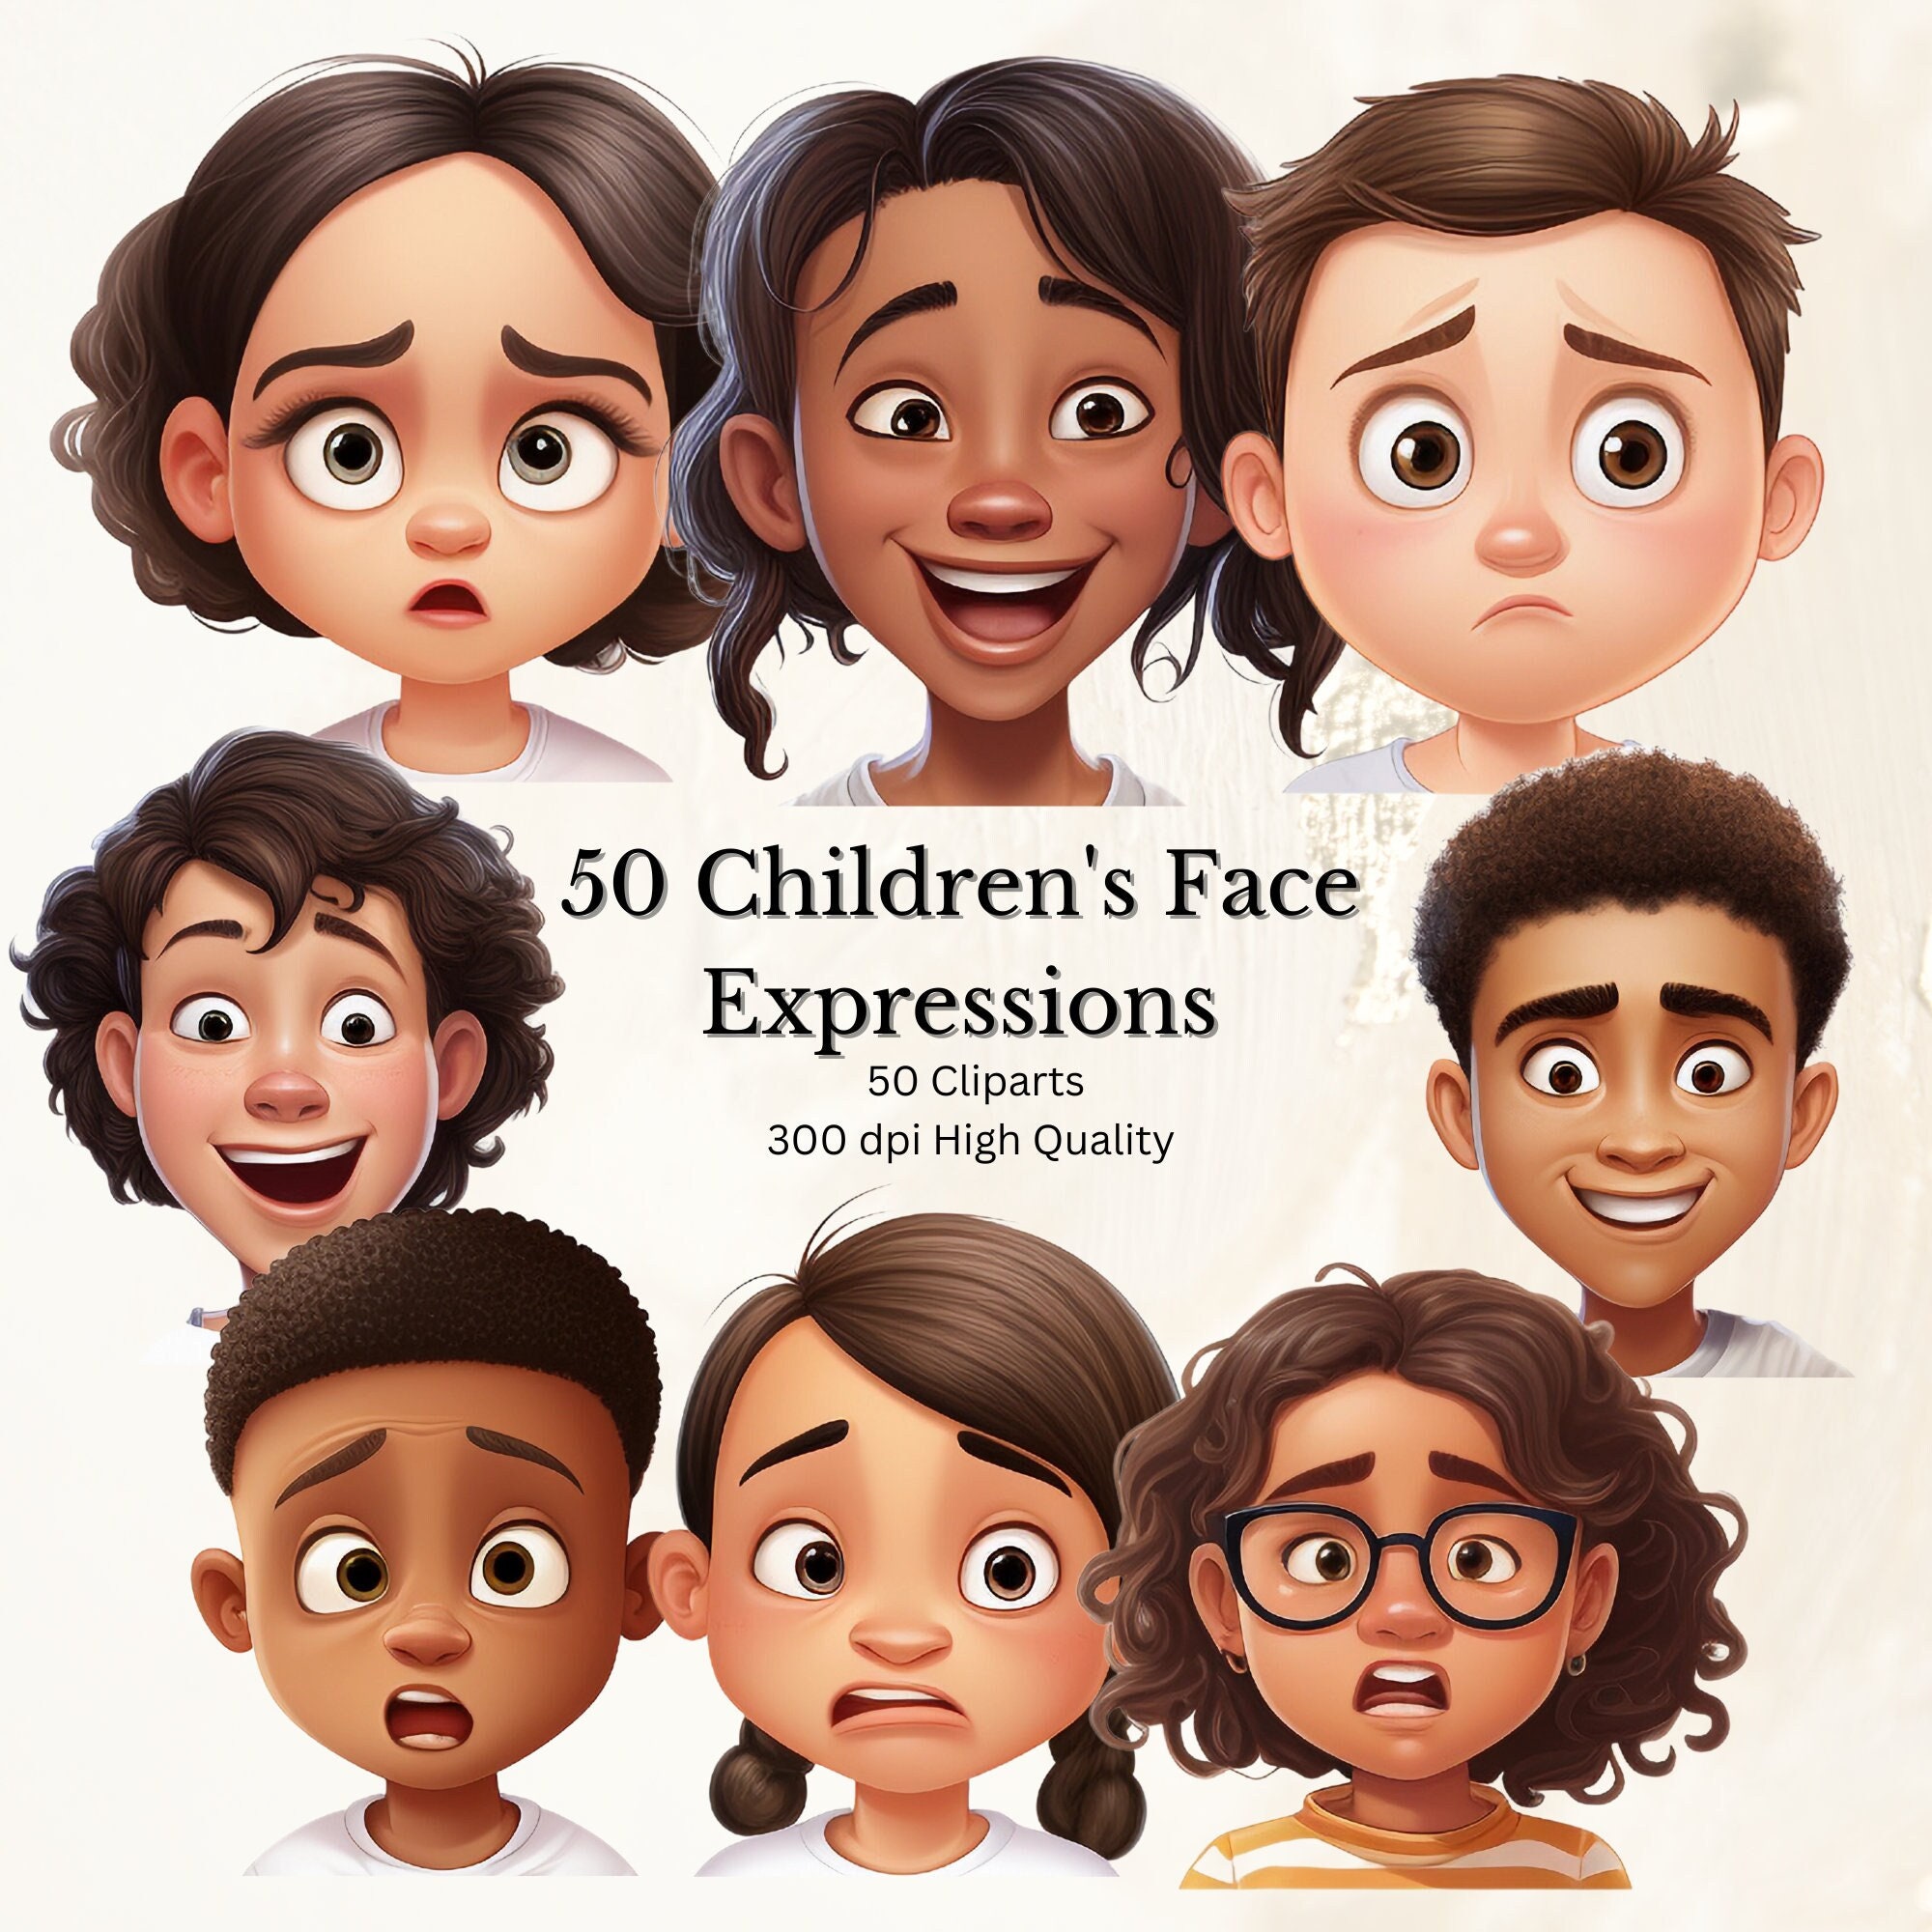 Little Girl Scared Face Expression, Set Of Cartoon Vector Illustrations  Isolated On White Background. Set Of Kid Emotion Face Icons, Facial  Expressions. Royalty Free SVG, Cliparts, Vectors, and Stock Illustration.  Image 151143367.